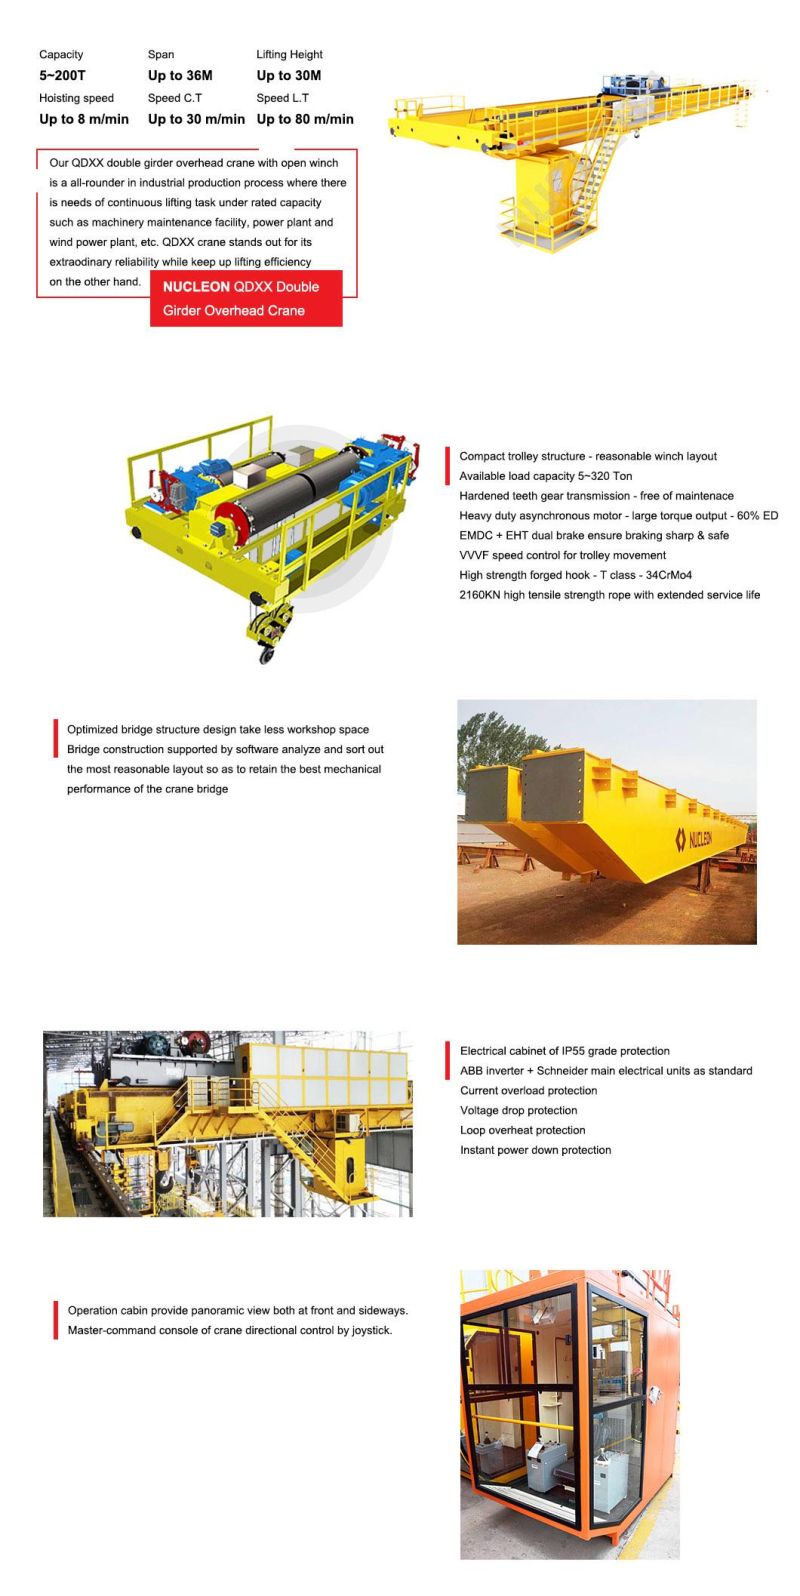 Nucleon High Performance Double Girder Electrical Winch Crab Overhead Crane for Shipyard